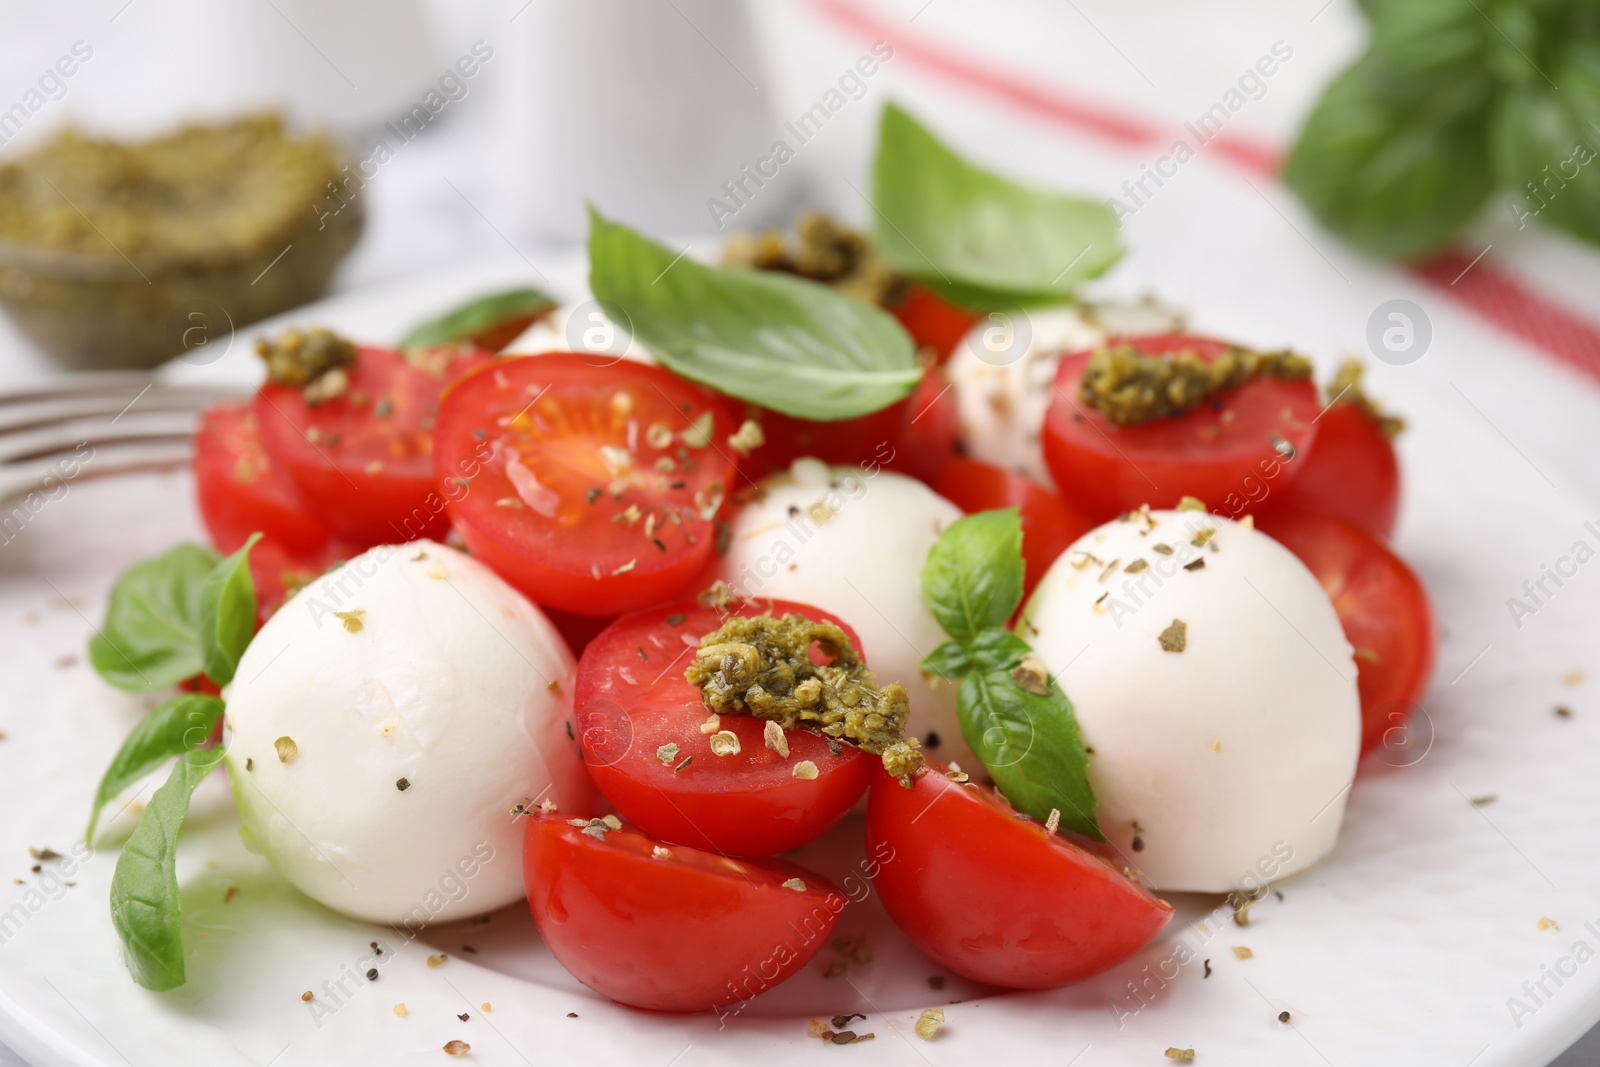 Photo of Tasty salad Caprese with tomatoes, mozzarella balls and basil on plate, closeup